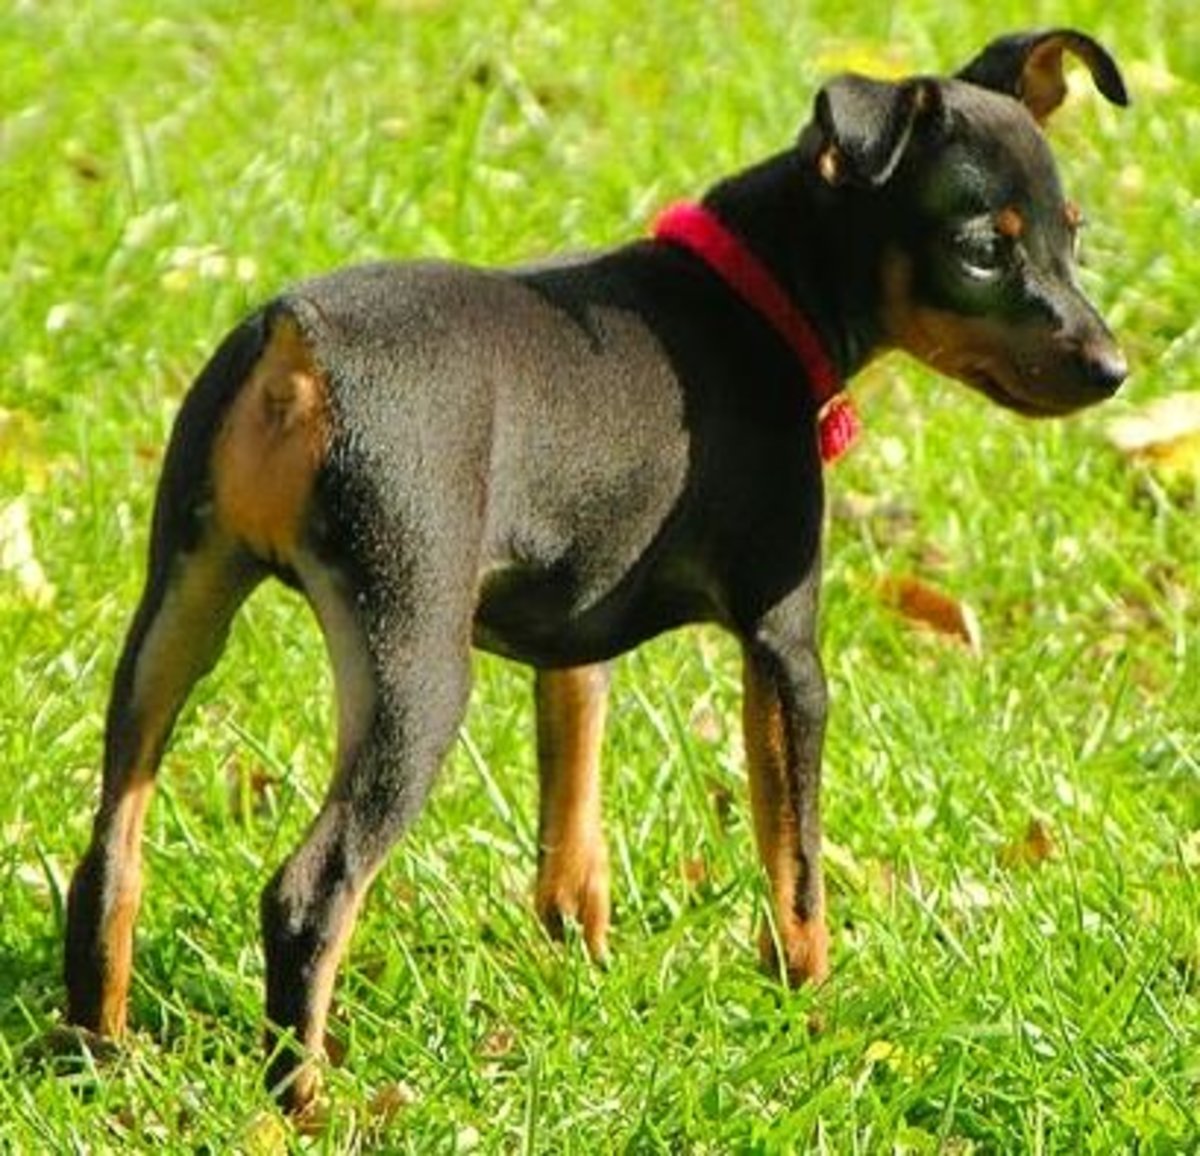 Who could resist this adorable Miniature Pinscher puppy?